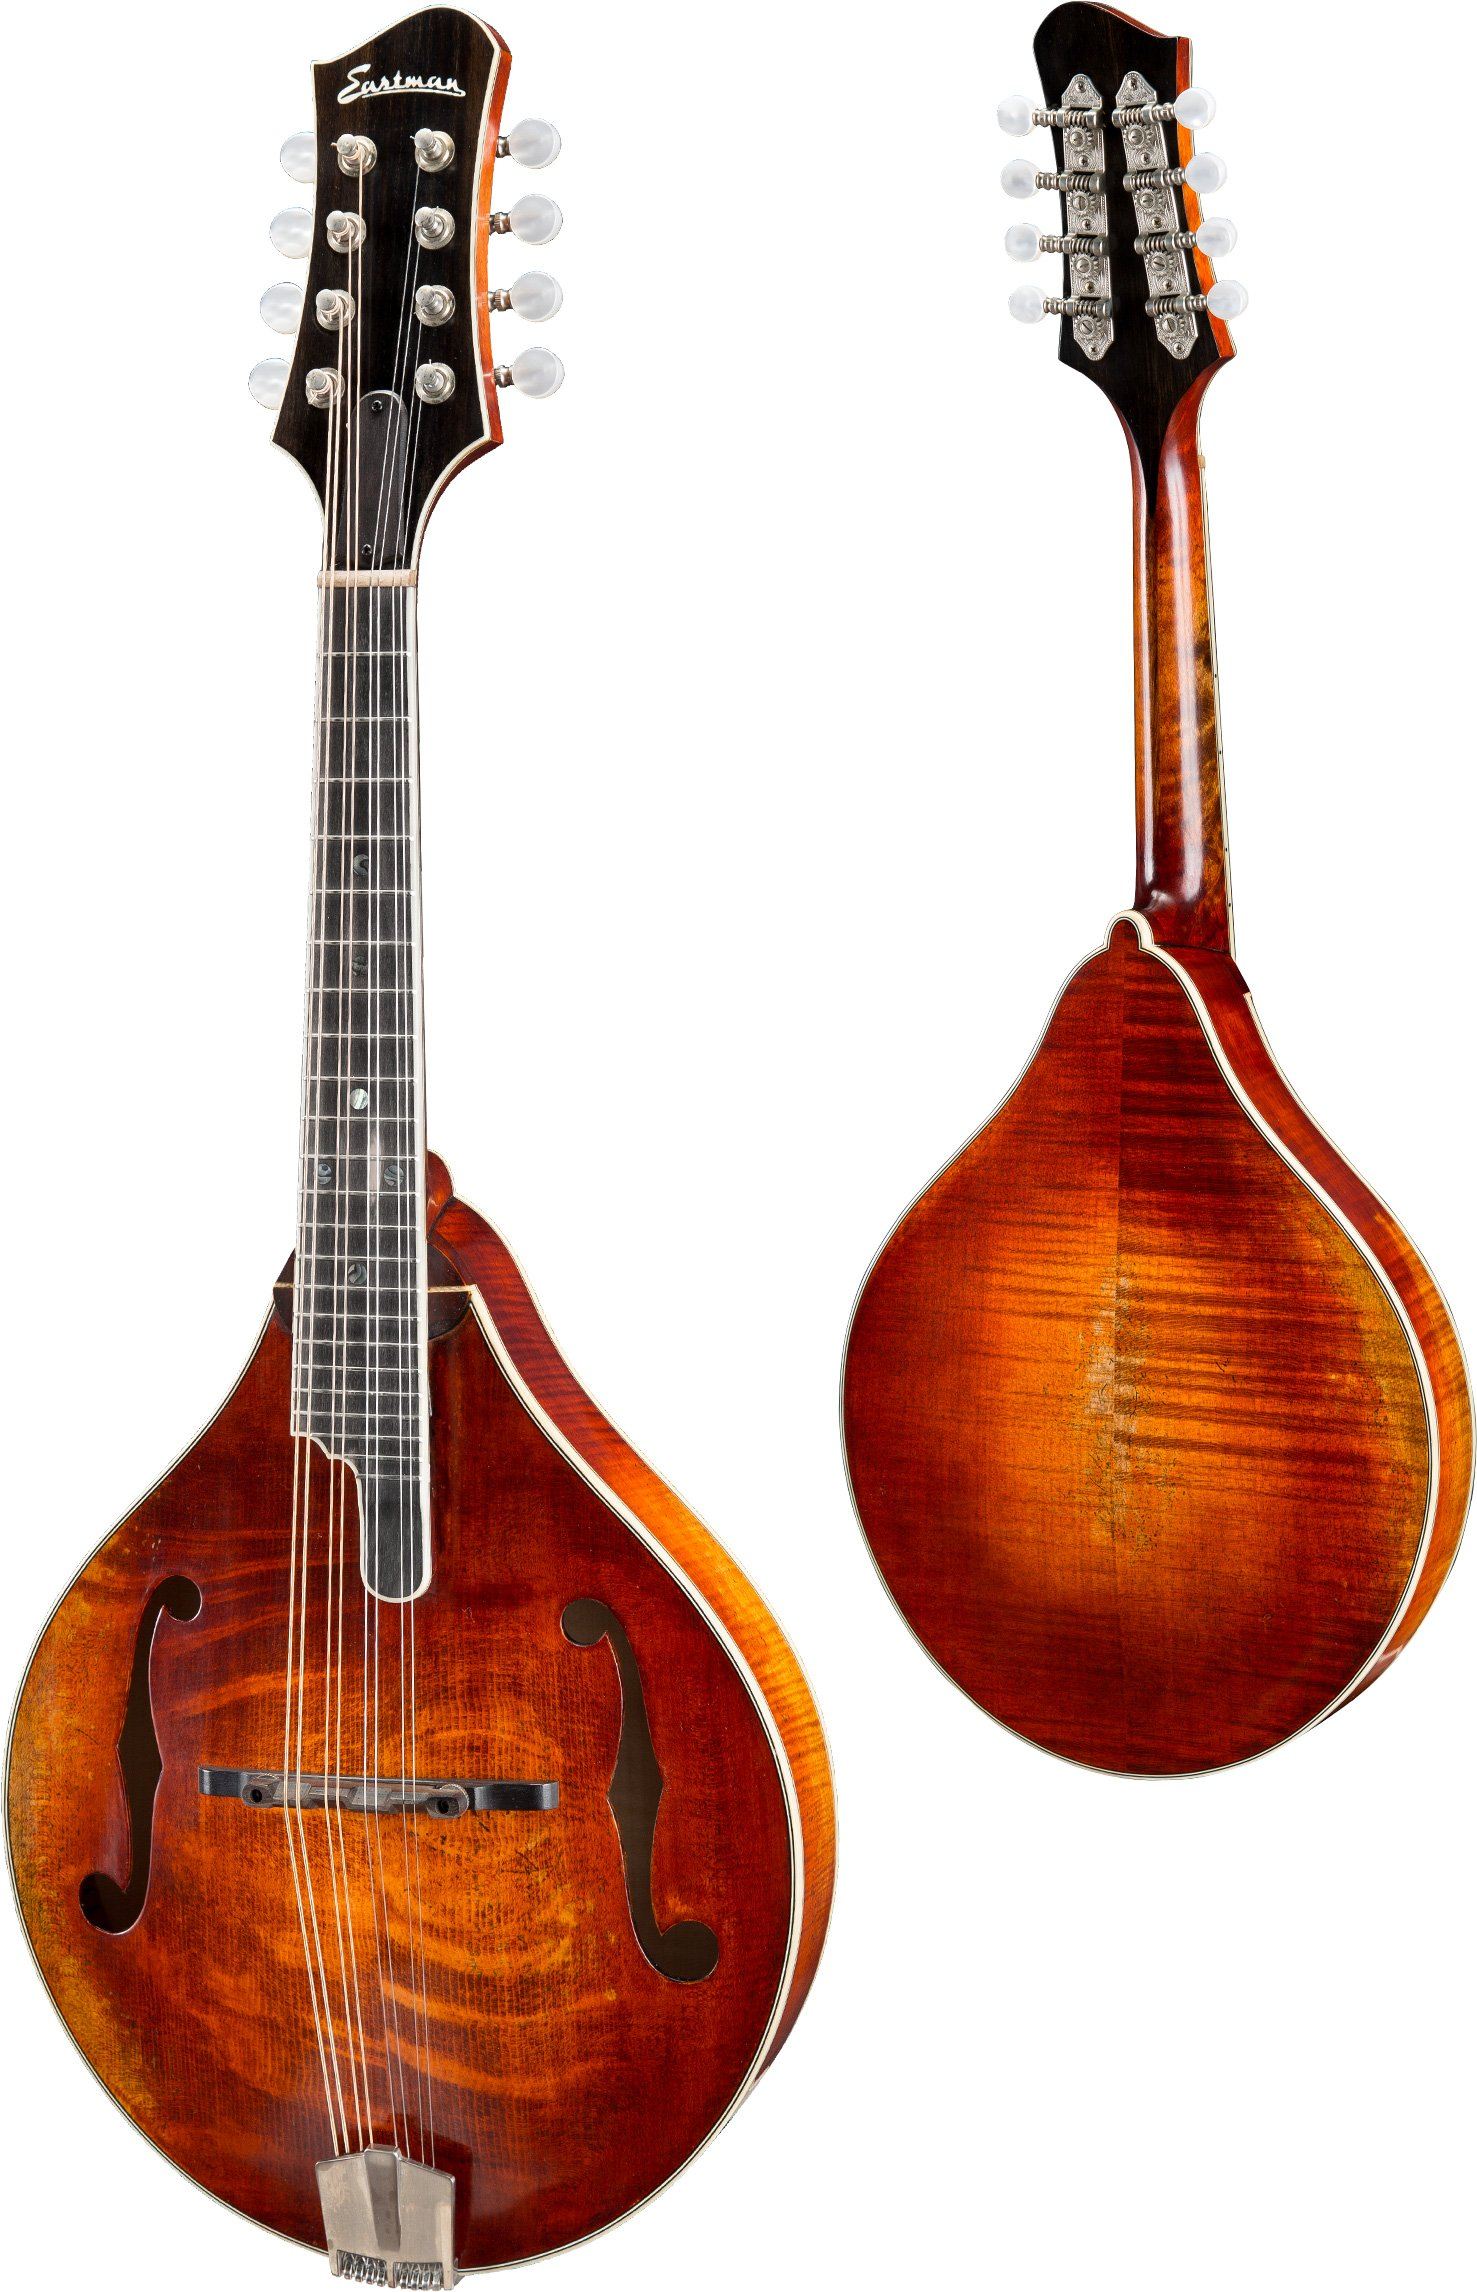 Eastman MD805/v Antique Classic varnish Mandolin (A-style F-holes, Solid Spruce top, Solid Maple back and sides, w/Case), Mandolin for sale at Richards Guitars.